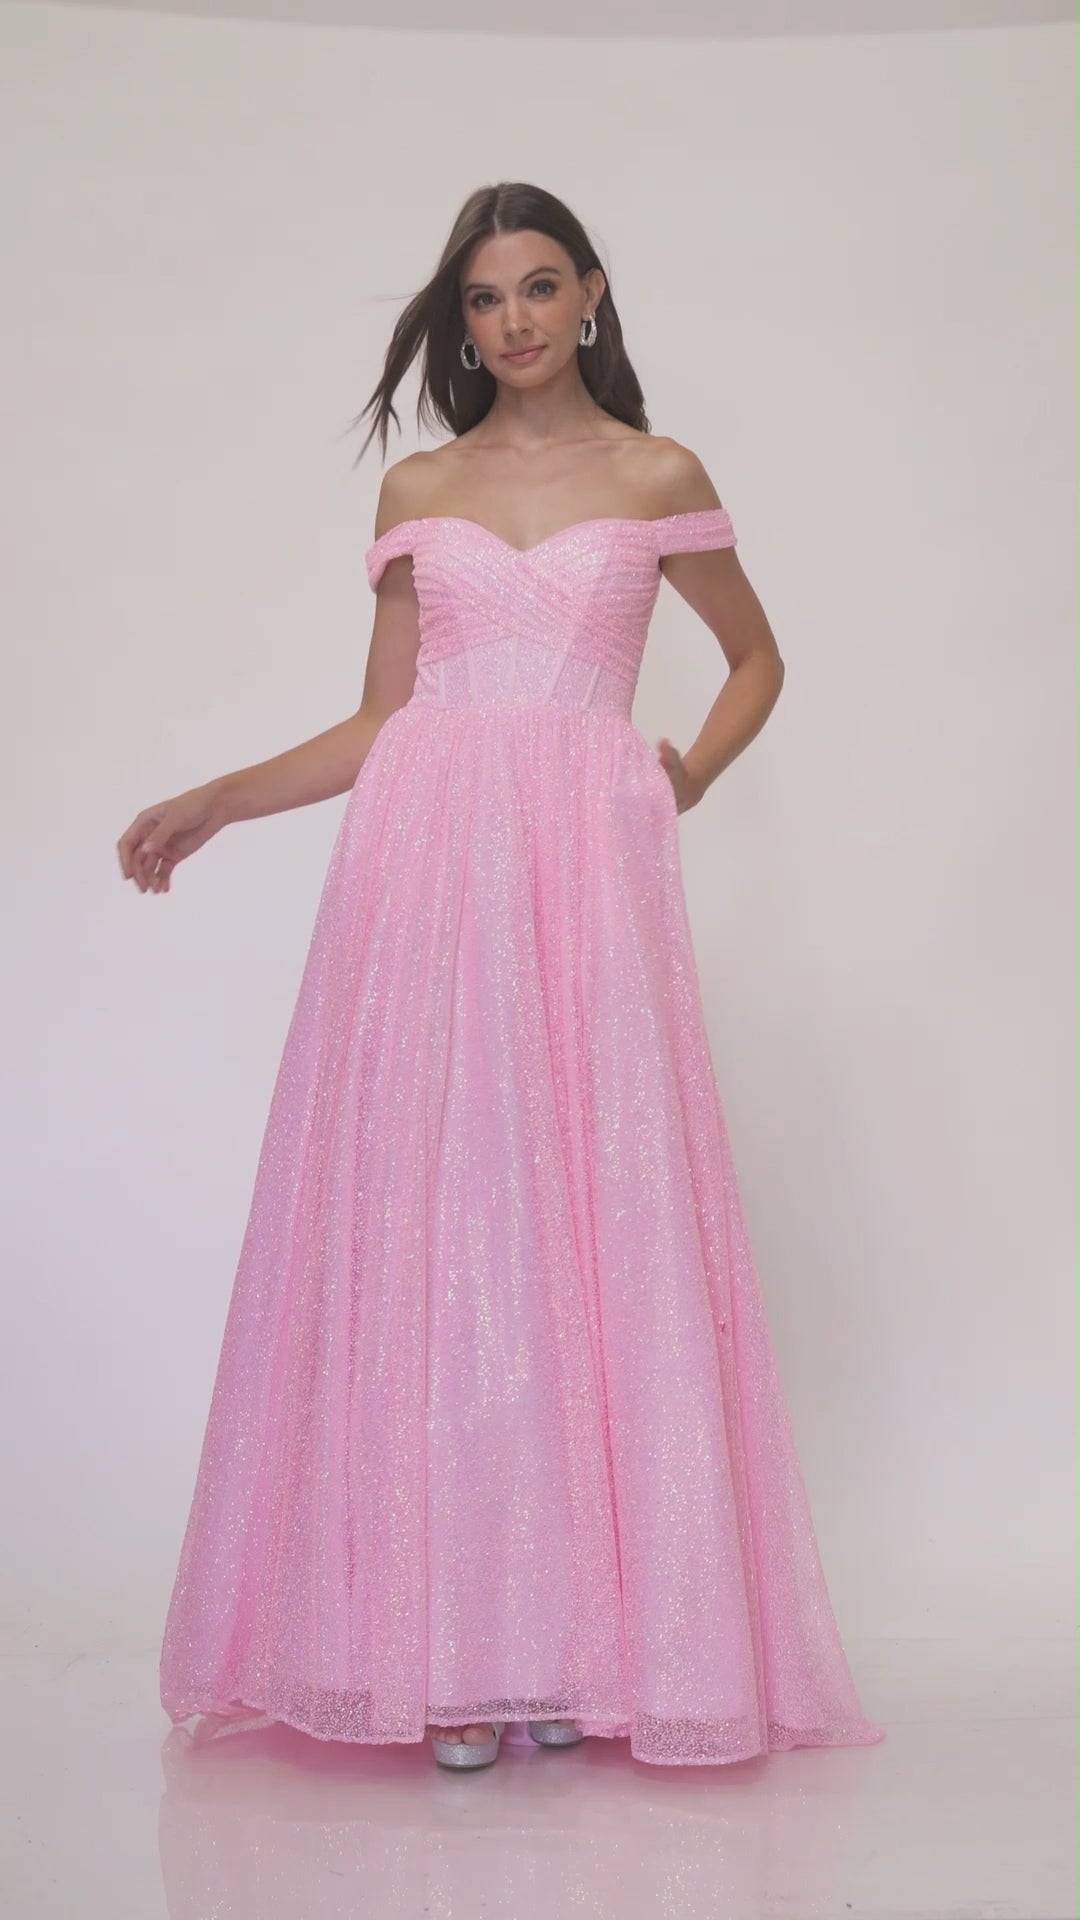 Lucci-Lu-1306-Sweetheart-Neckline-Open-Back-Sweep-Train-Glitter-Tulle-A-Line-Pink-Evening-Dress-B-Chic-Fashions-Prom-Dress